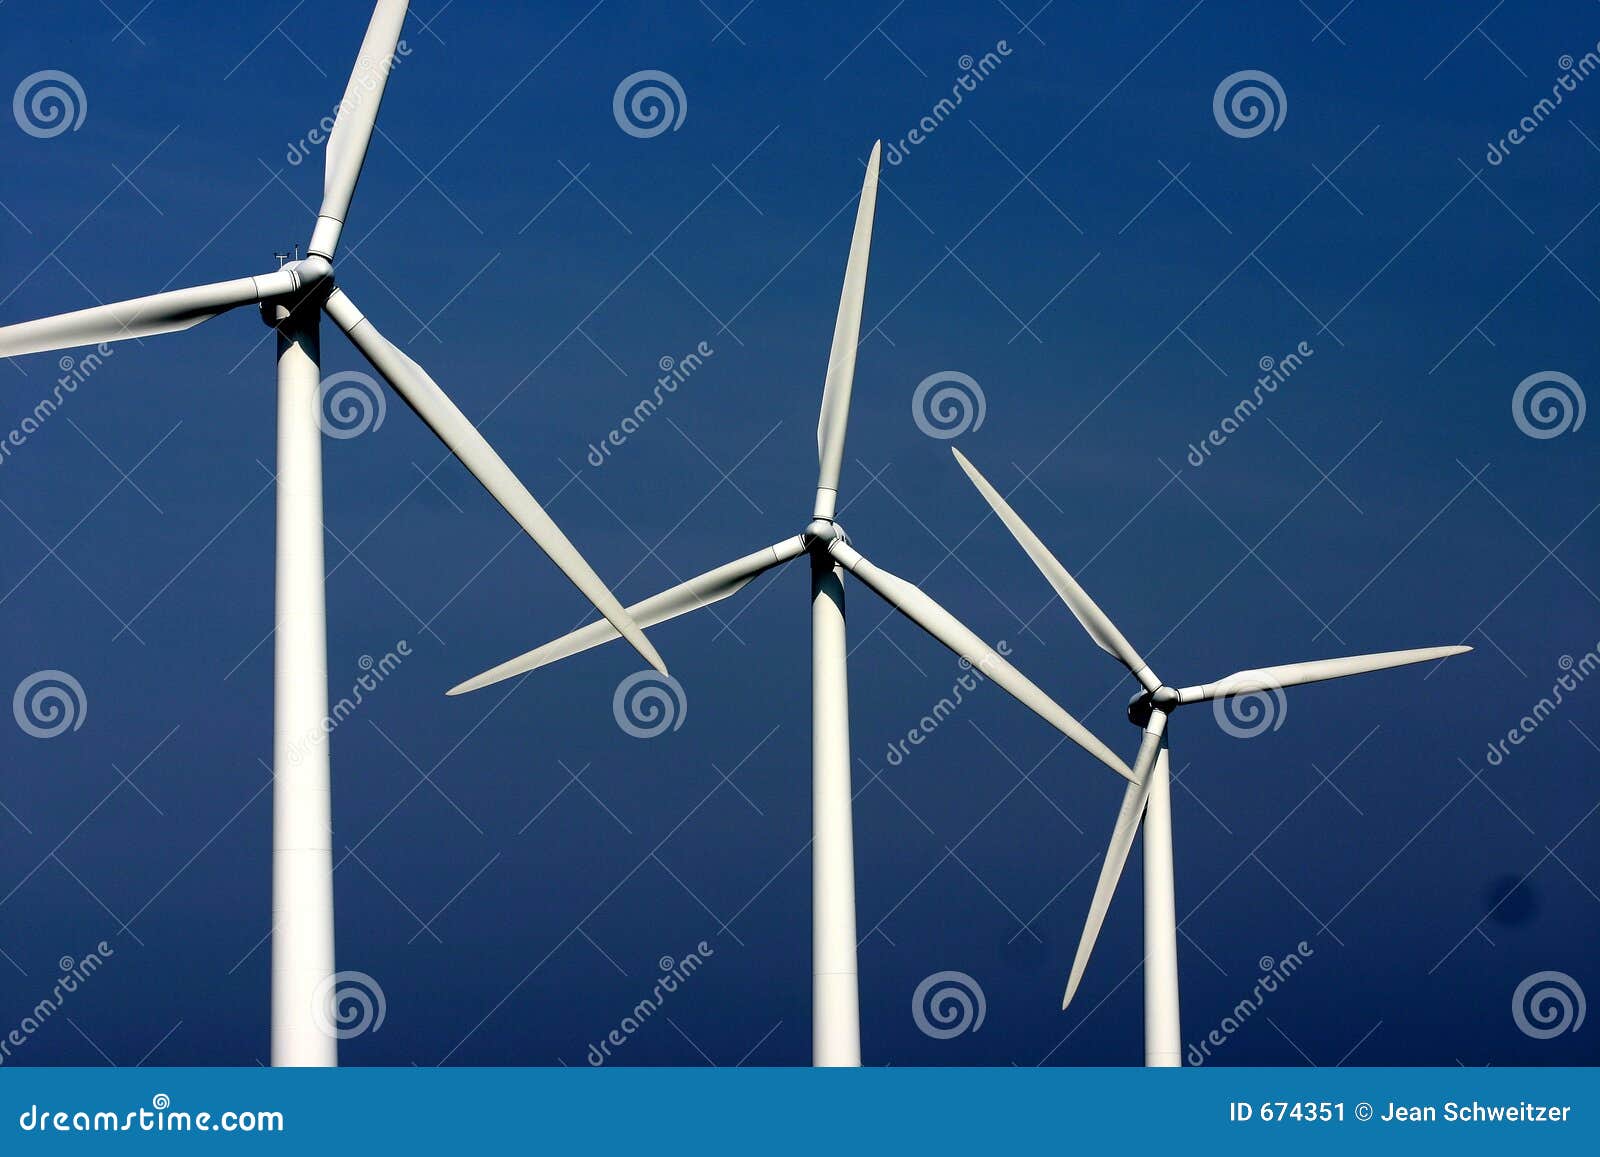 electricity wind mills